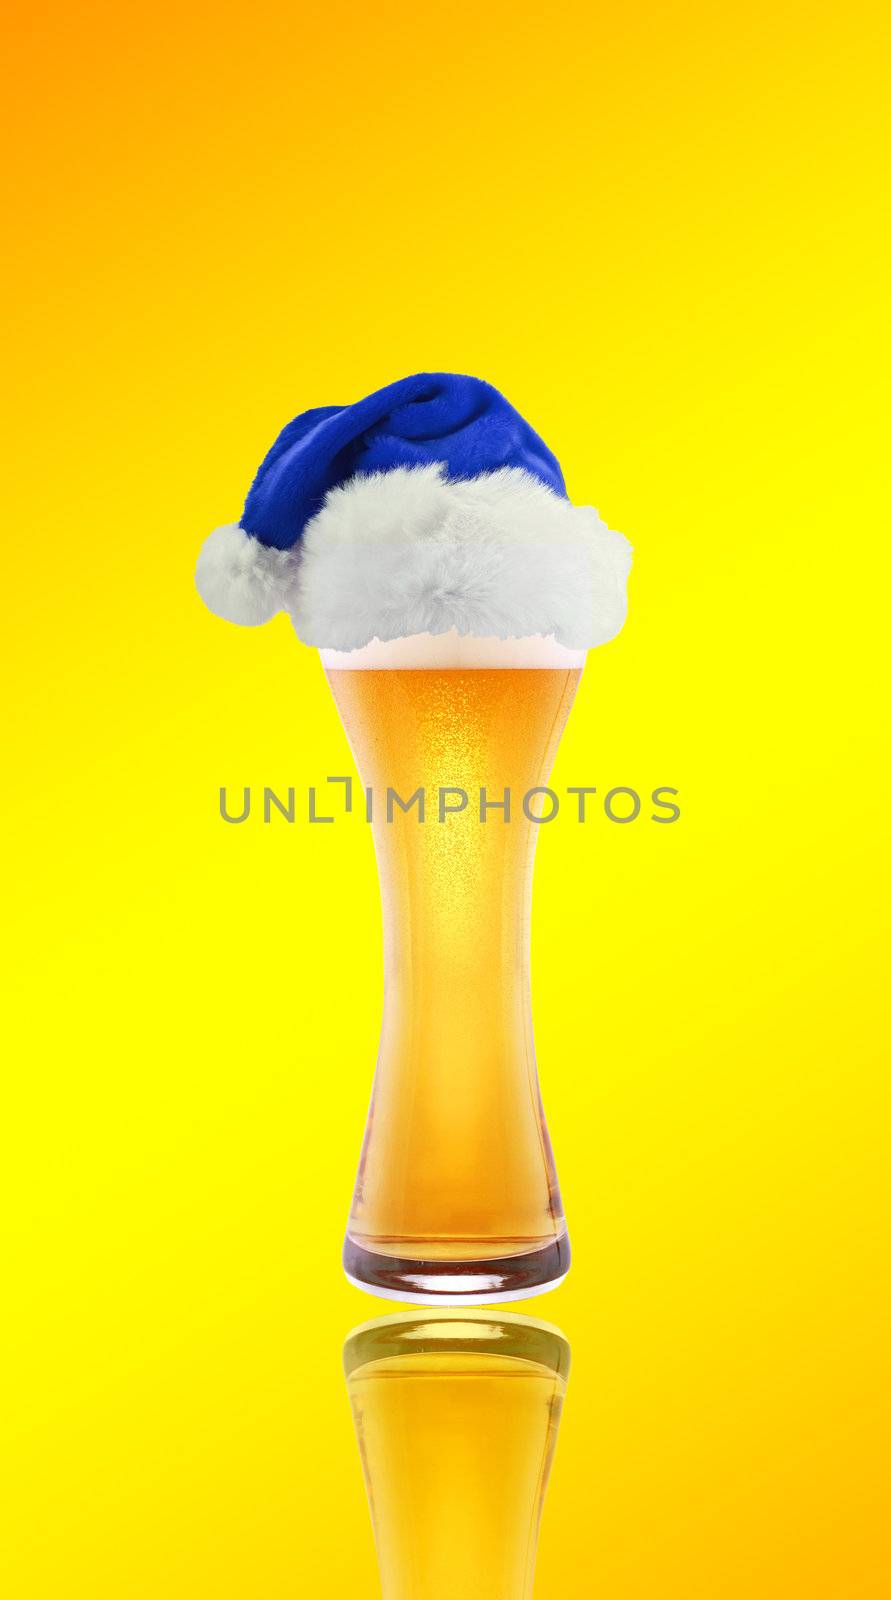 Beer and hat of Santa Claus on a yellow background by ozaiachin